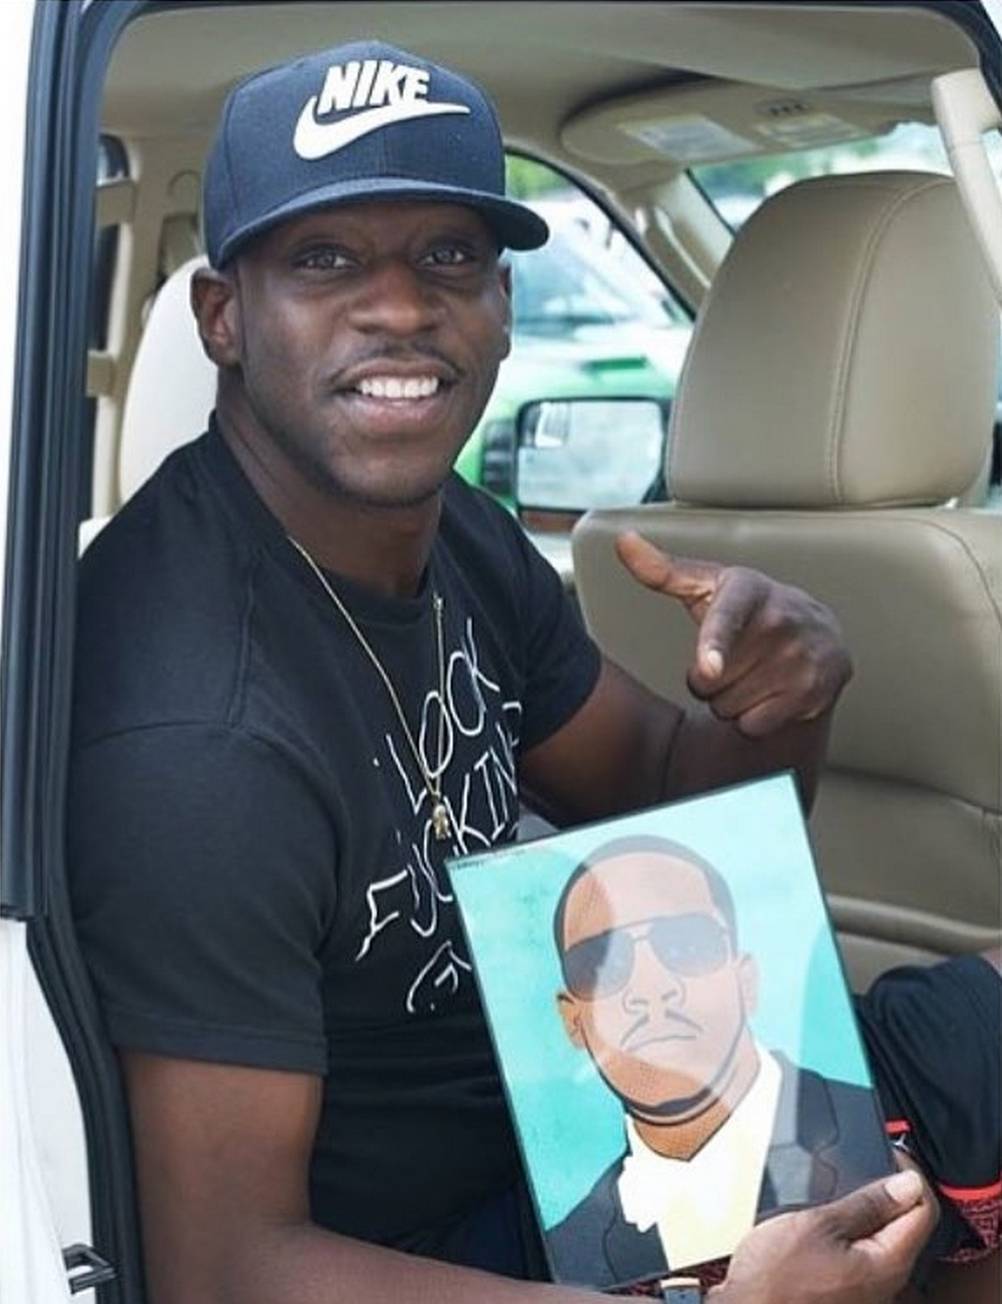 Young Dro: Too Deep for the Caption - The Southern rapper lives out his hustler dreams in his music and on the 'gram. Dro keeps it 100! (Photo: Young Dro via Instagram)